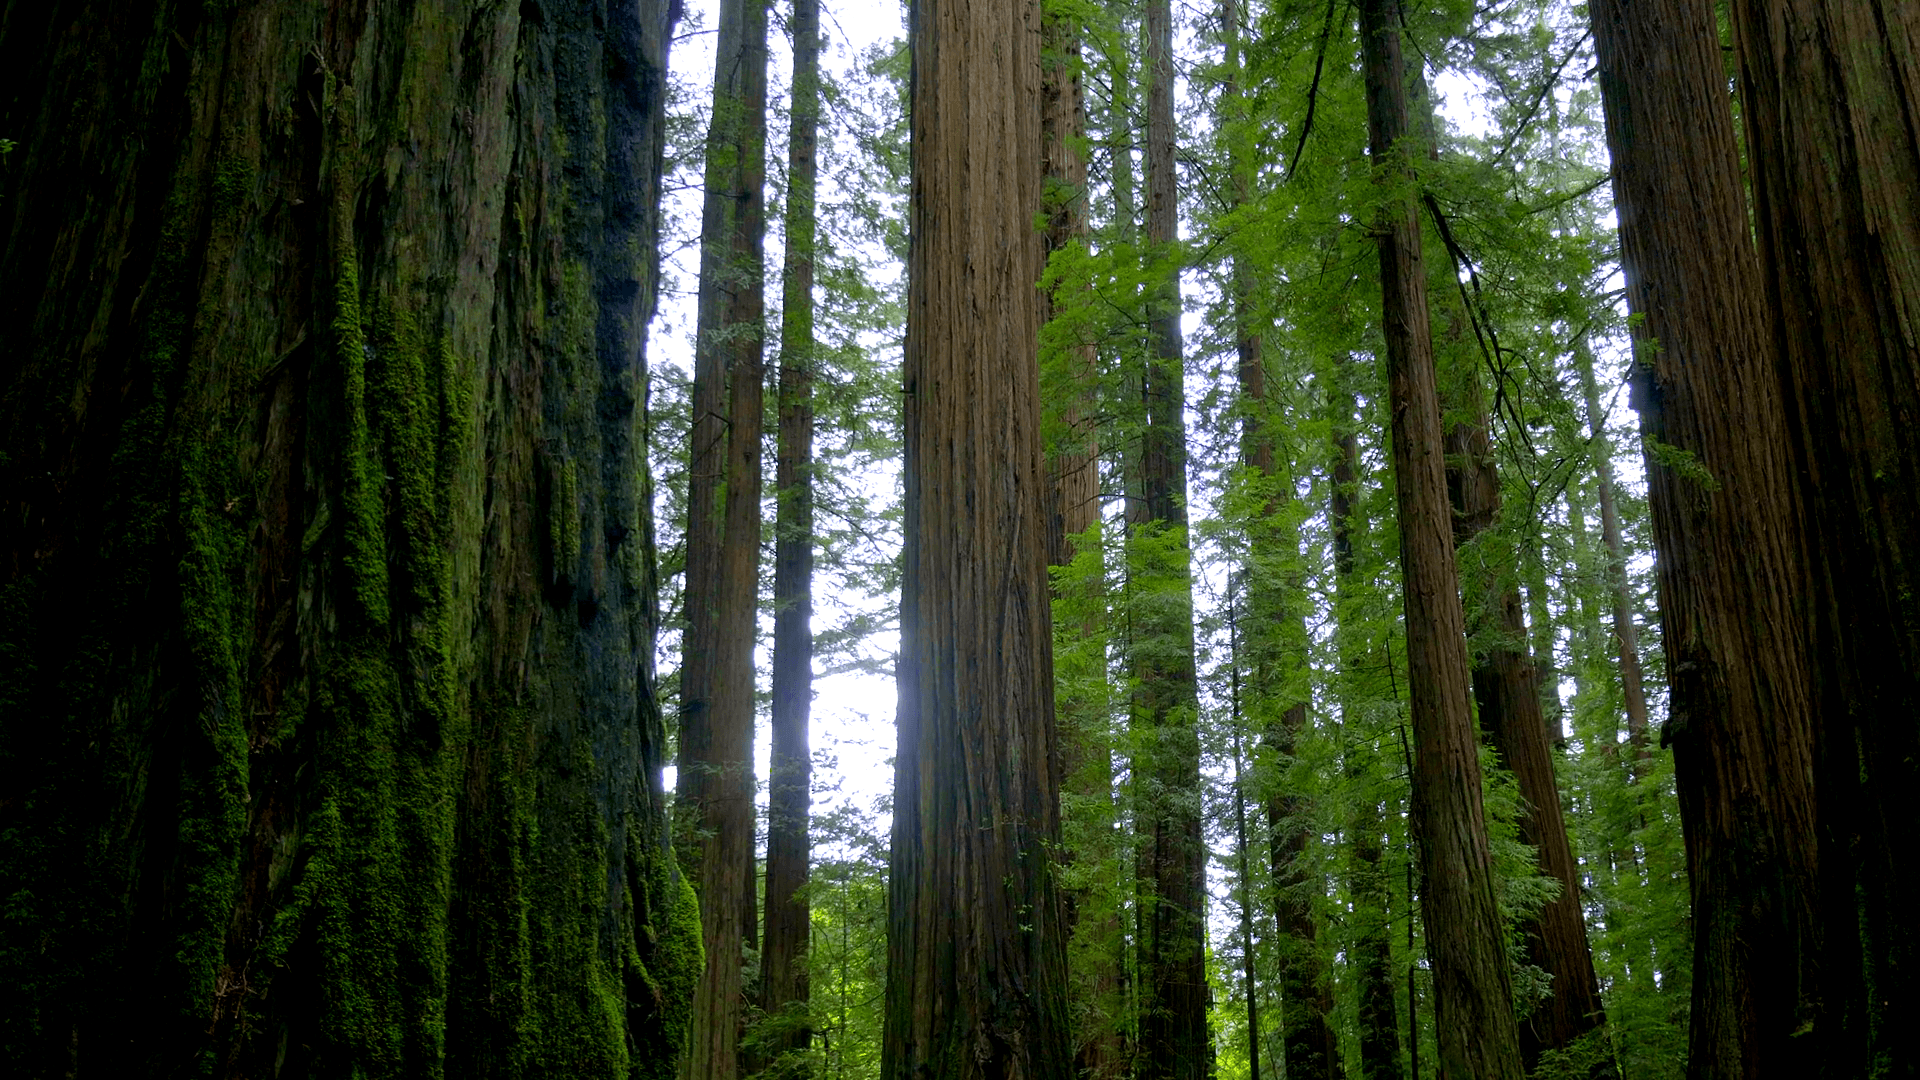 Giant red cedar trees in the Avenue of the Giants National